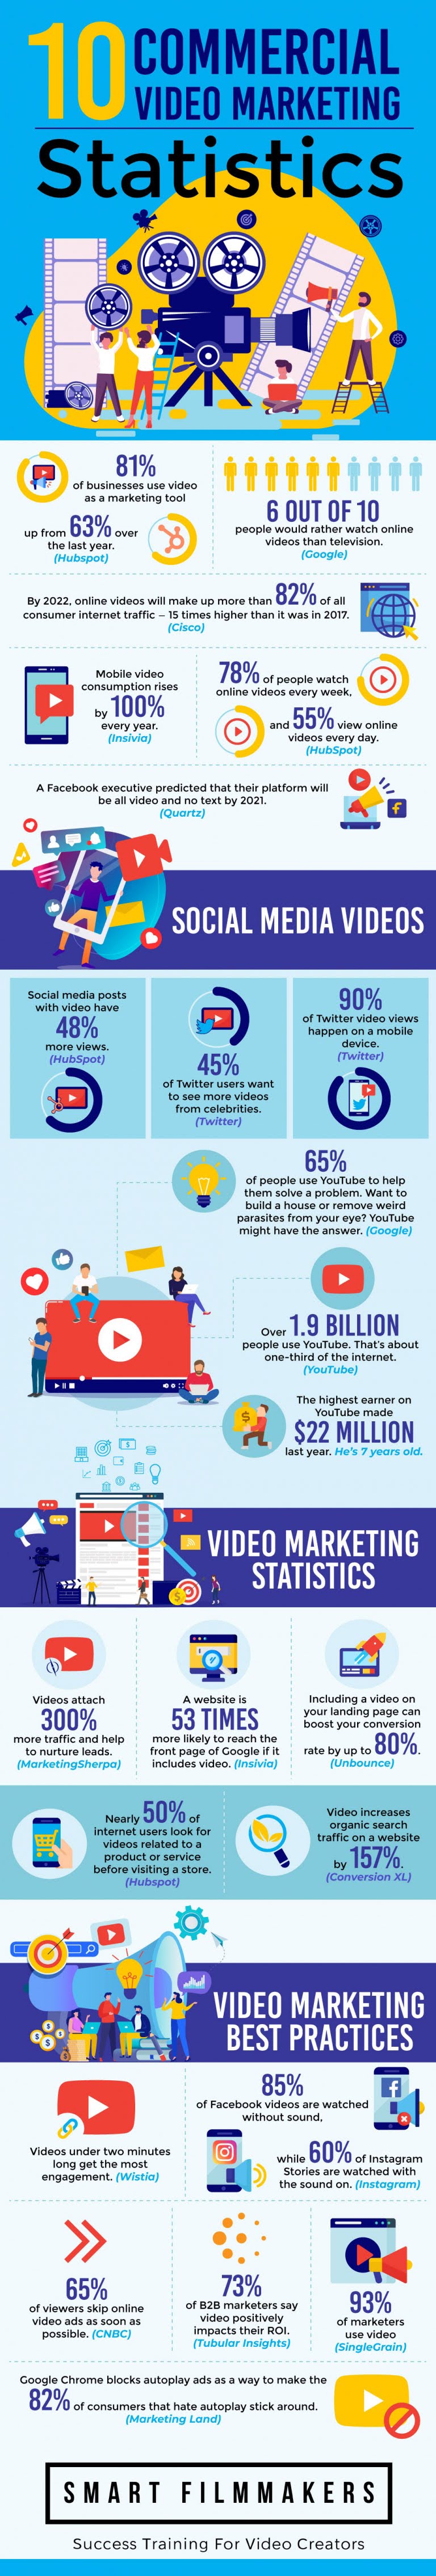 10 Commercial Video Marketing Statistics #infographic